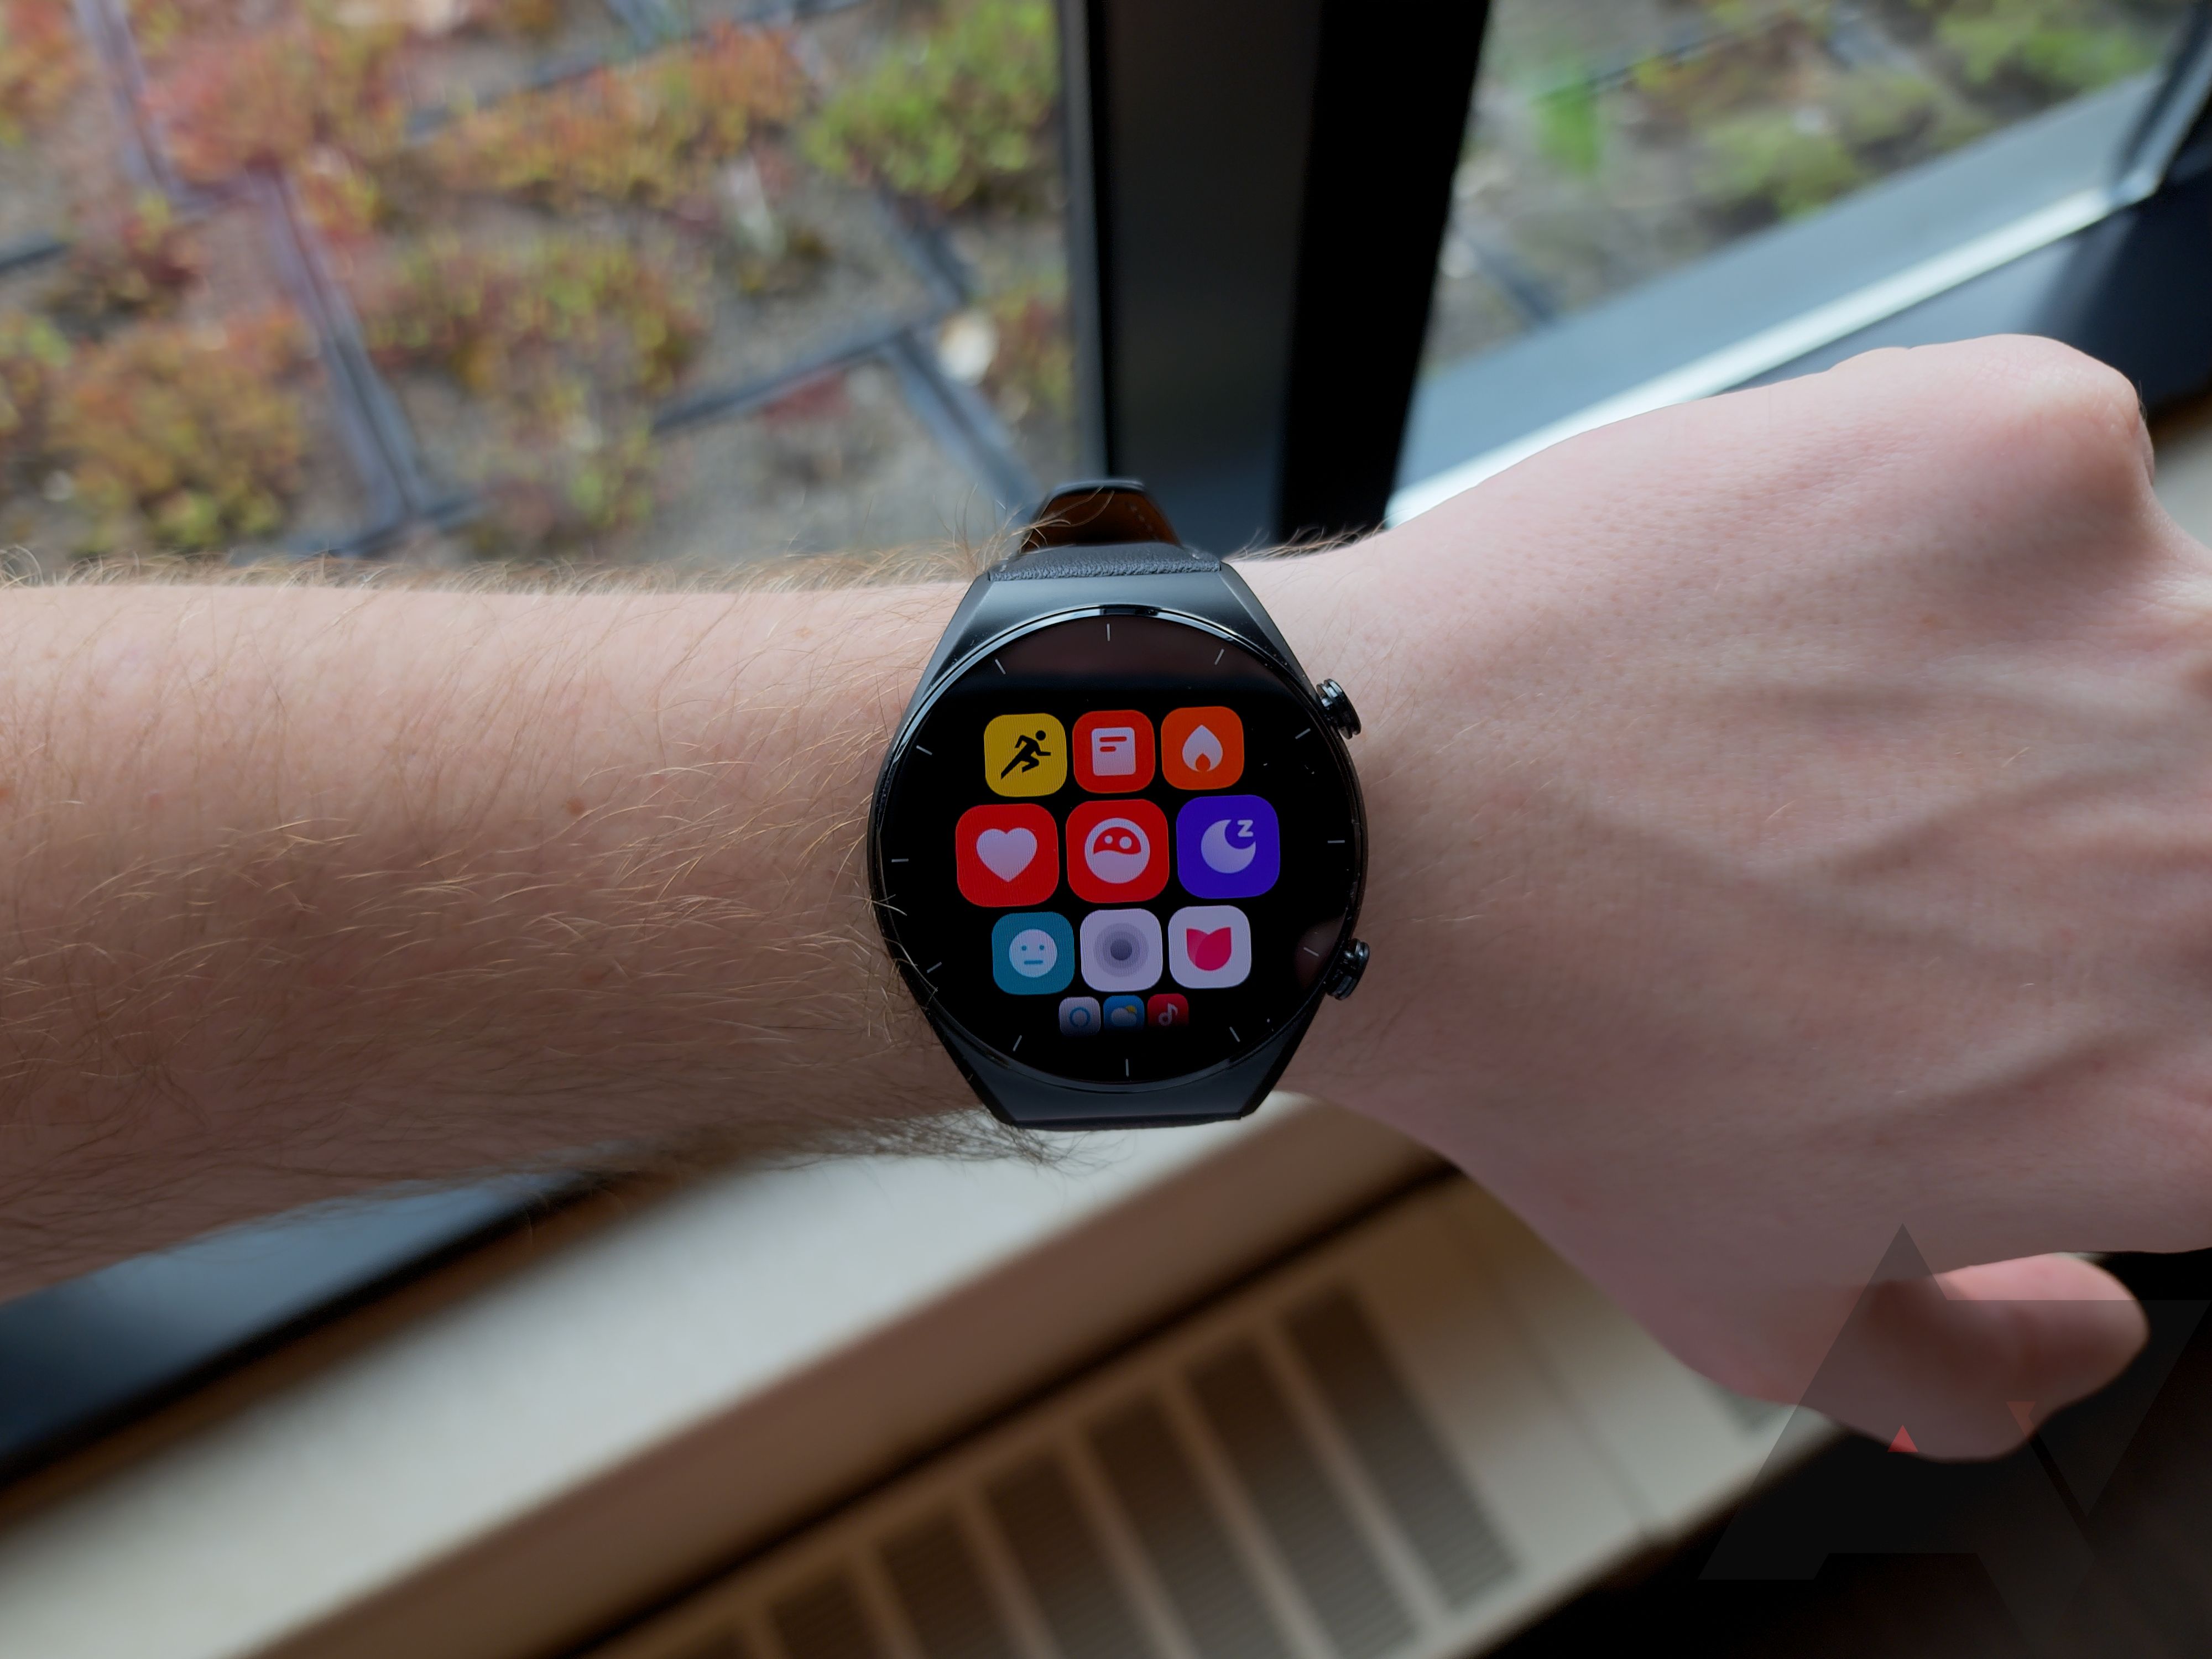 A smartwatch showing several app icons.